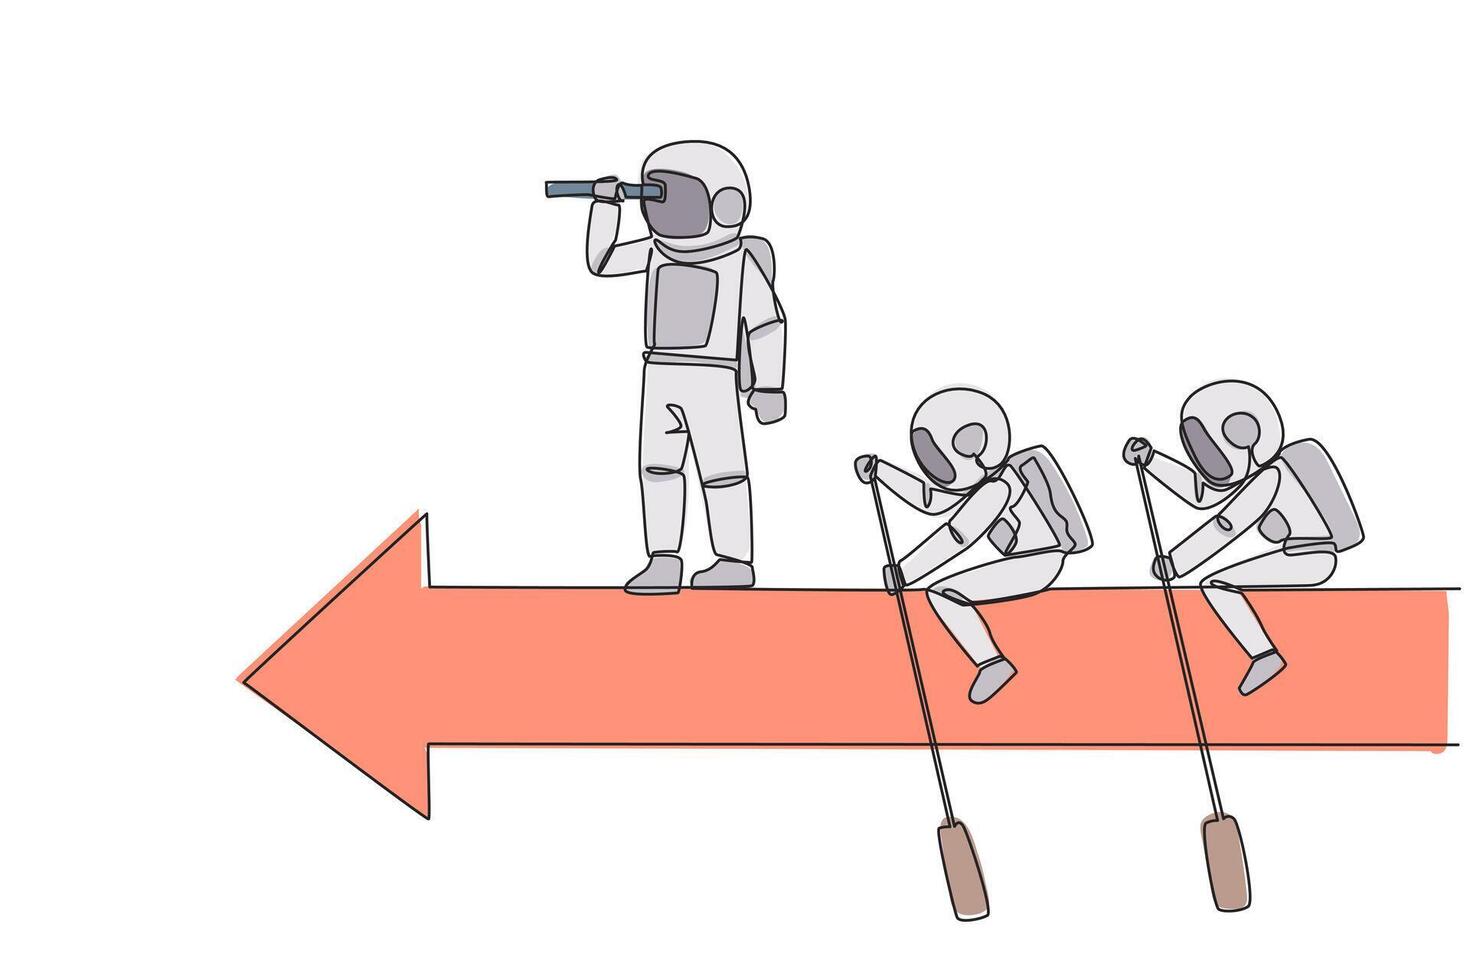 Single continuous line drawing 3 astronauts ride arrows. Teamwork with two of them rowing, the rest standing up using binoculars. Cosmic galaxy outer space concept. One line design vector illustration